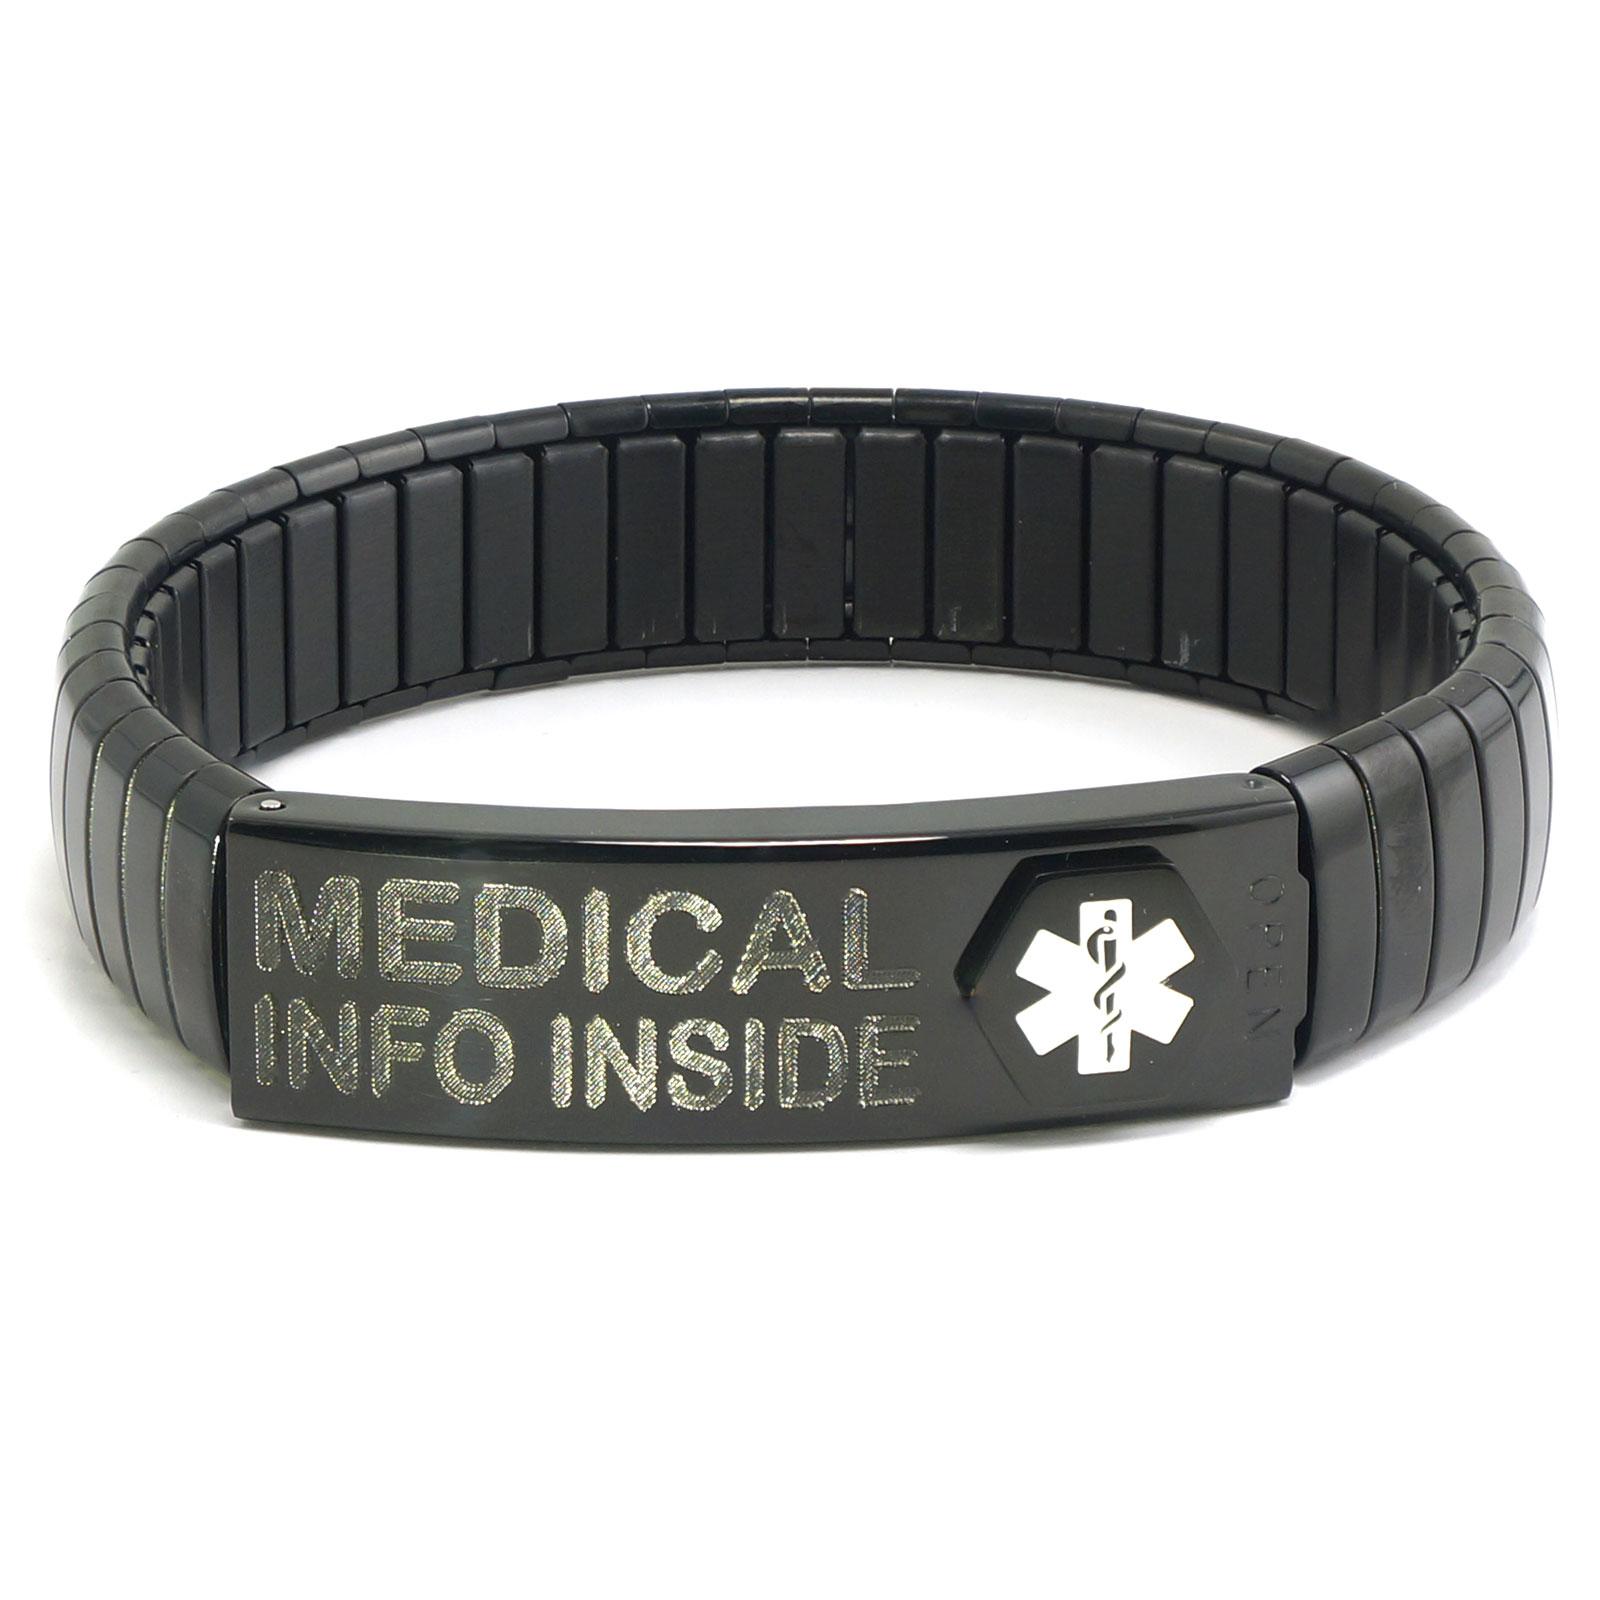 Black Medic Alert Stretch Bracelet with up to 300 Letters printed onto ...